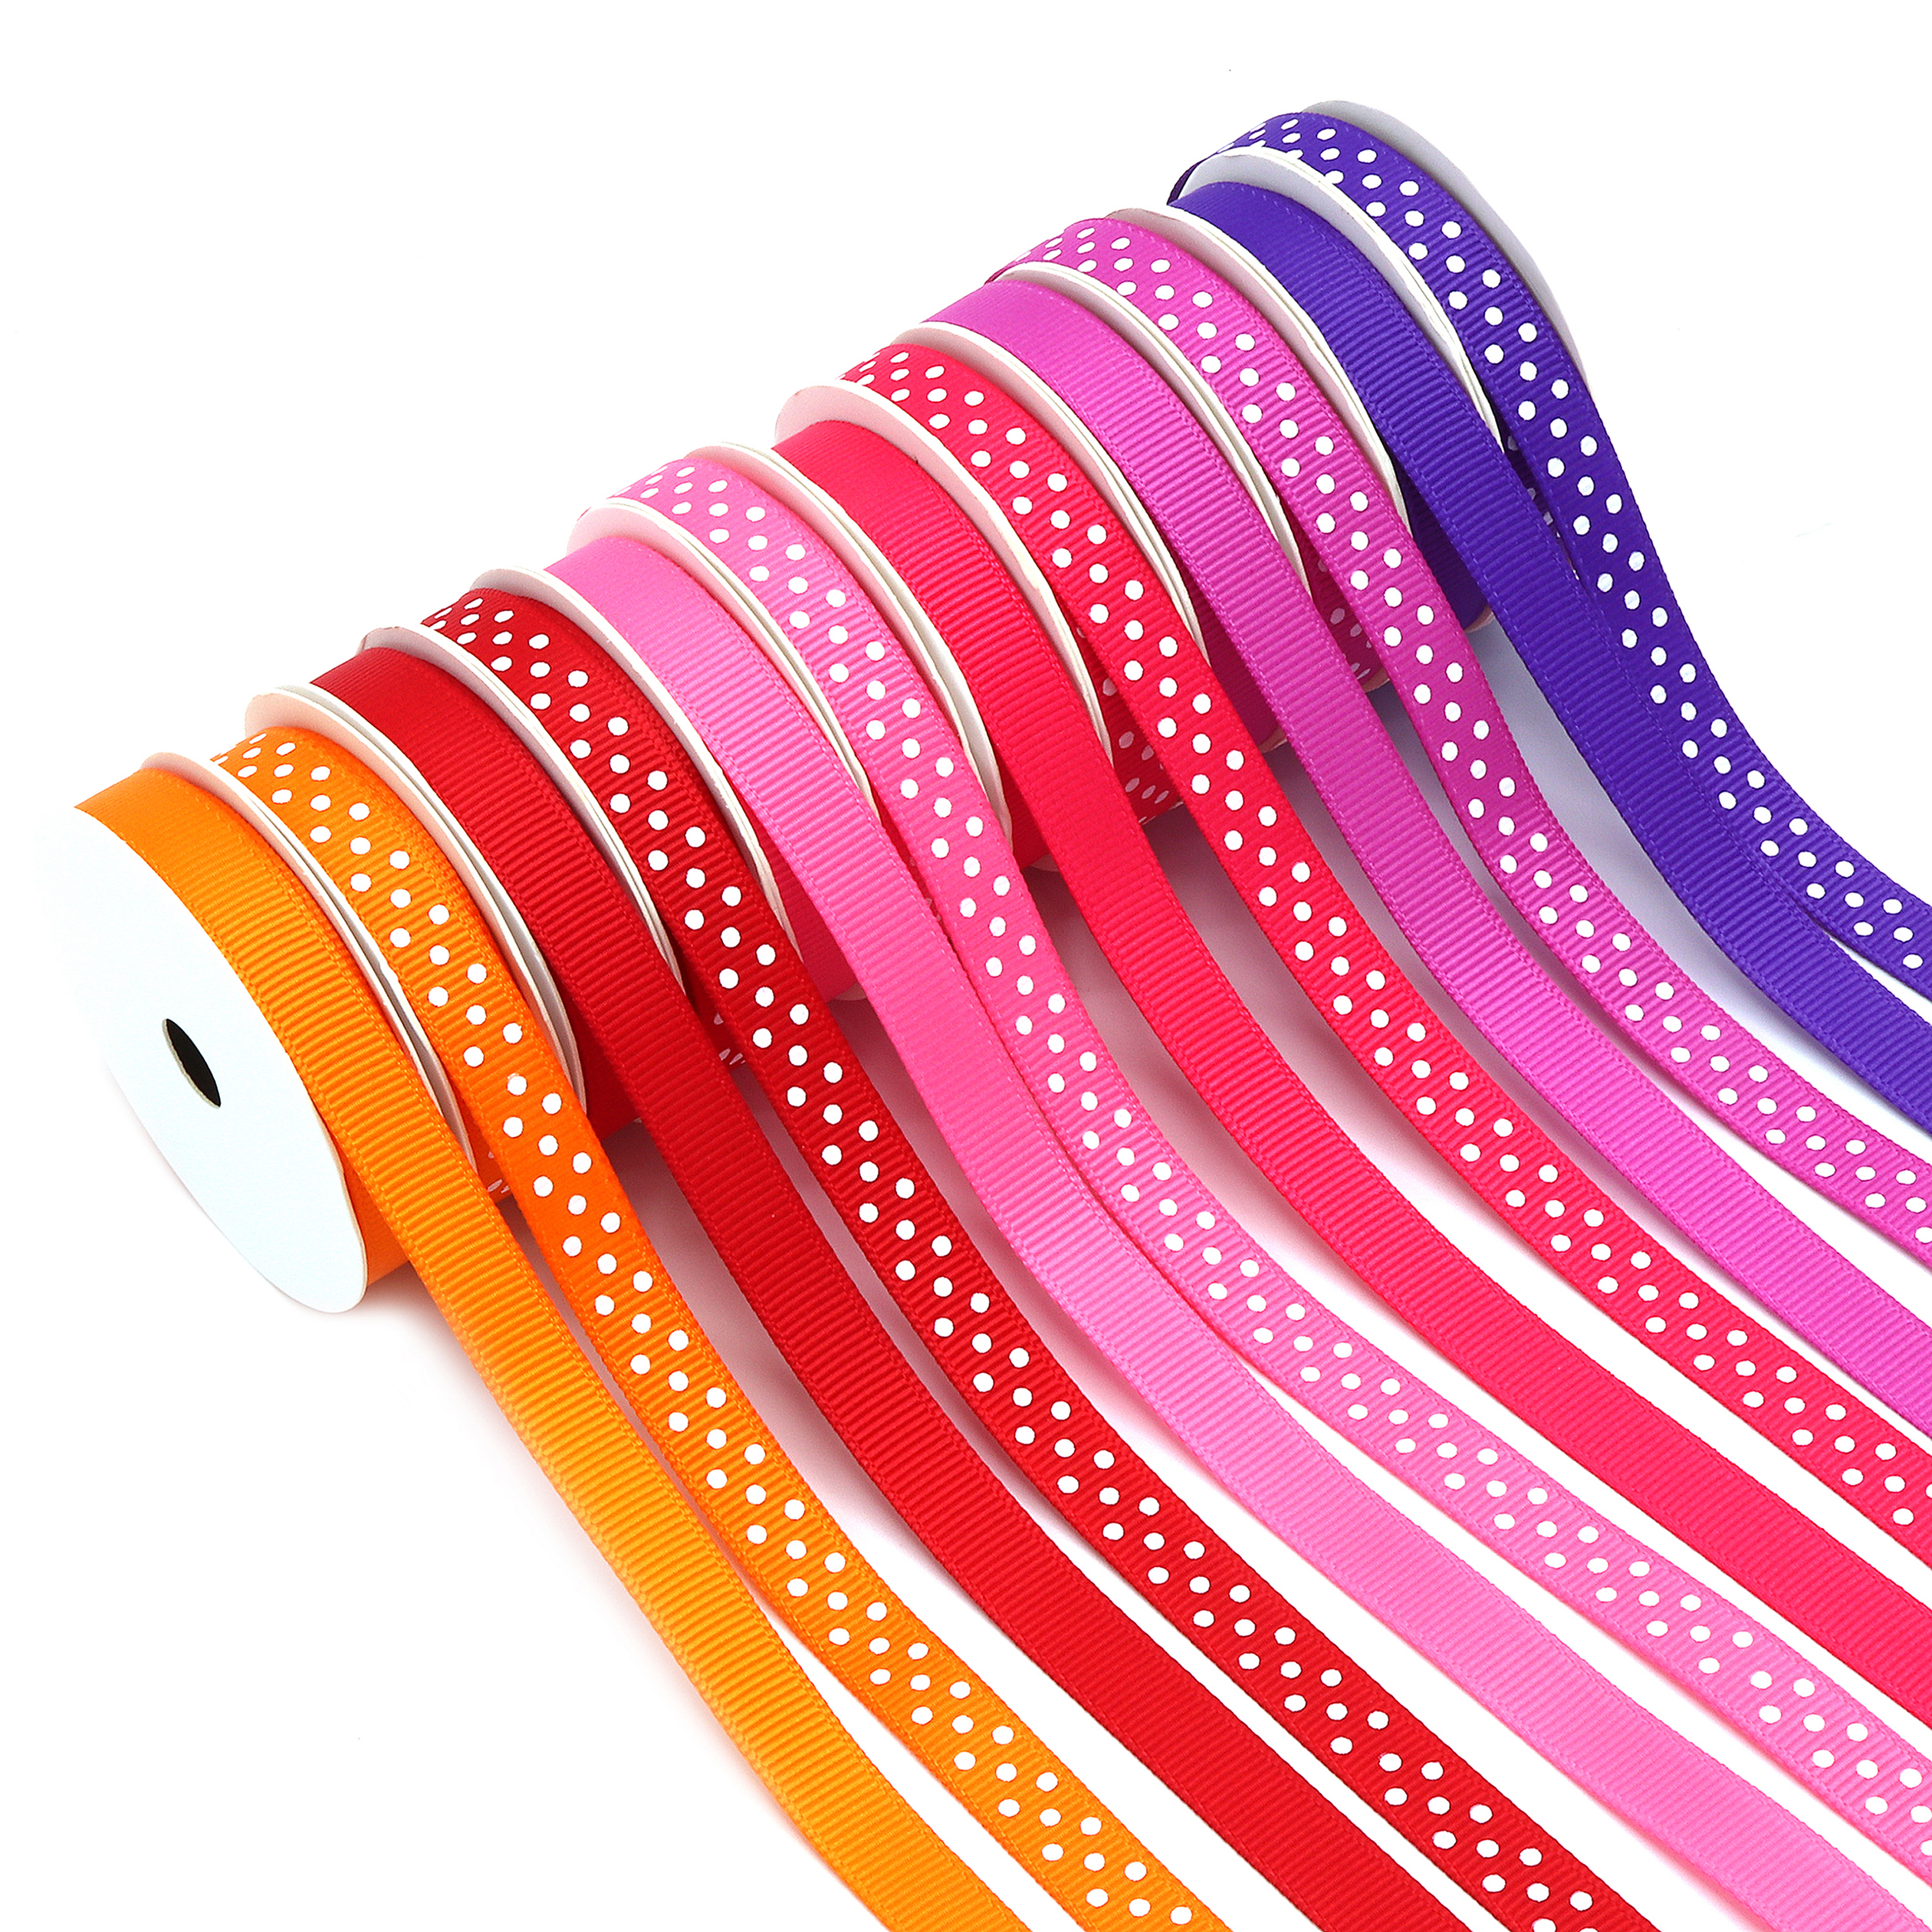 Solid and Polka Dot Grosgrain Ribbon Pack, 24 Bright Colors, 3/8" x 48 Yards by Gwen Studios - image 5 of 7